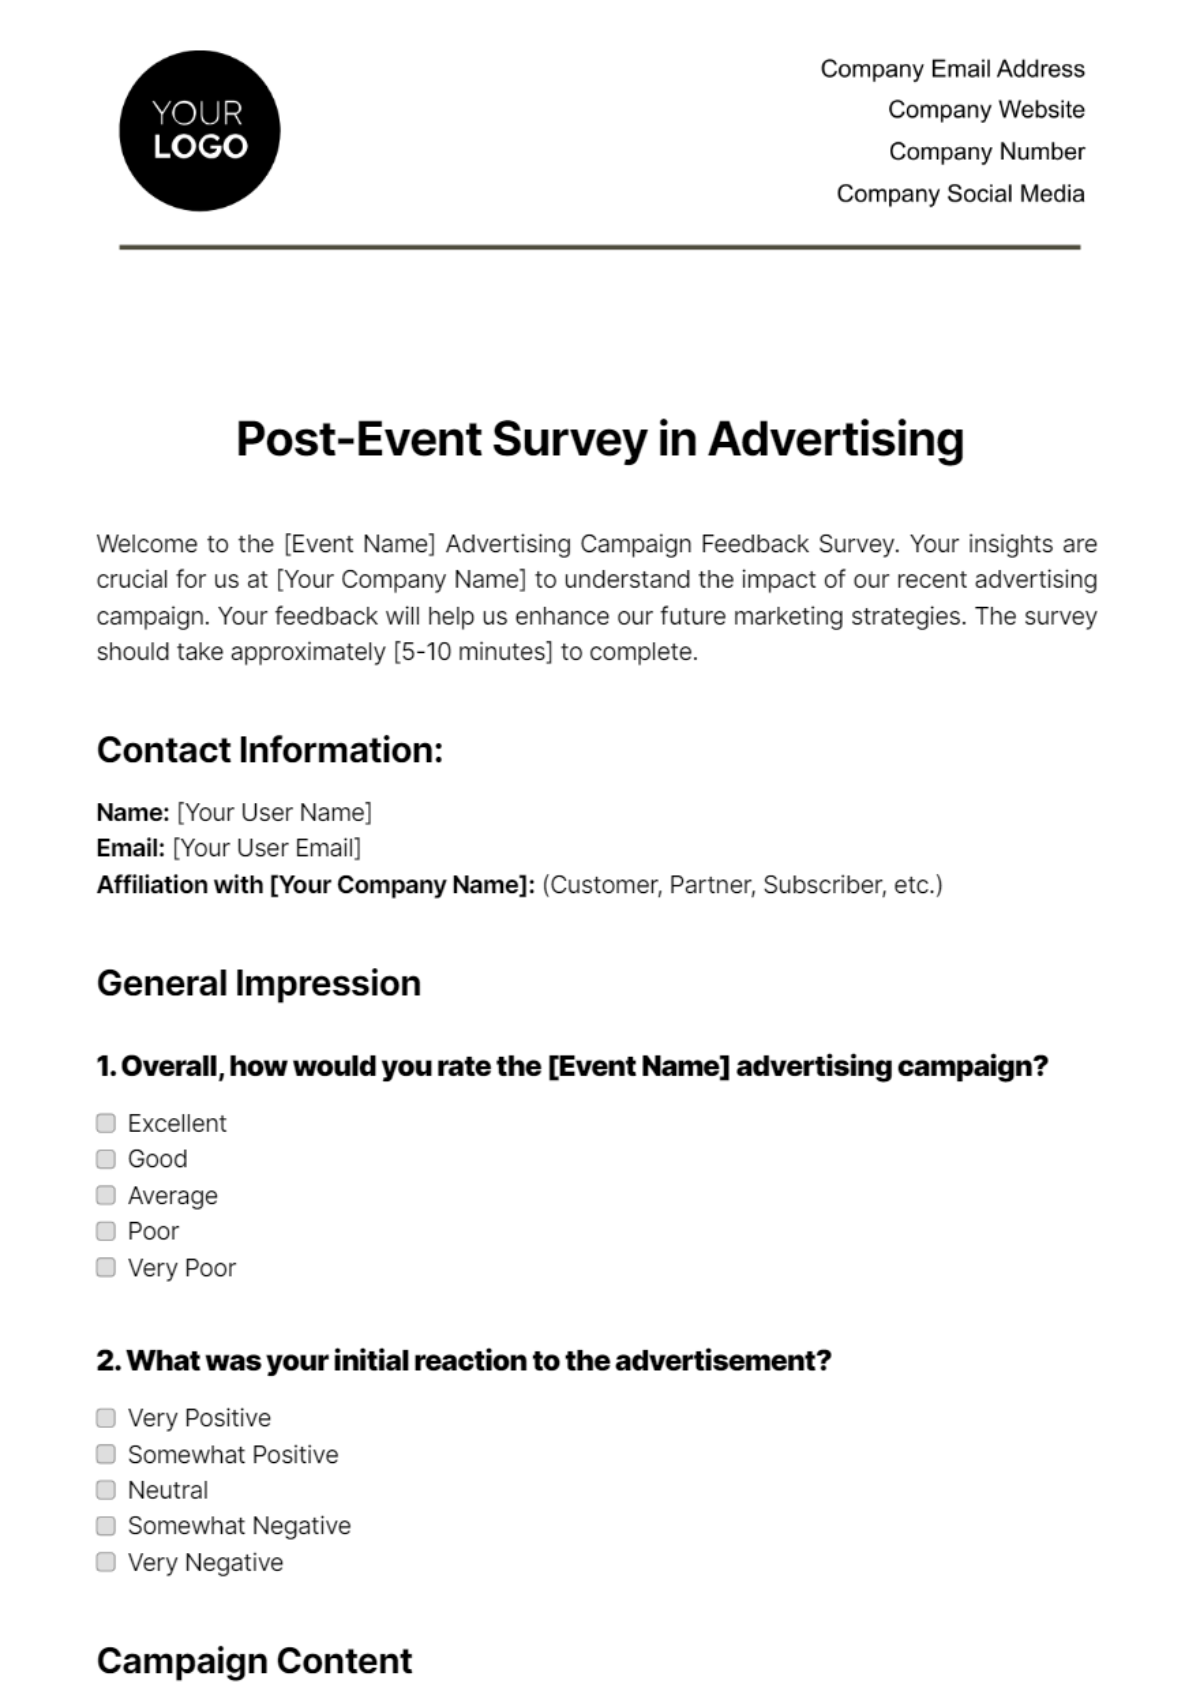 Post-Event Survey in Advertising Template